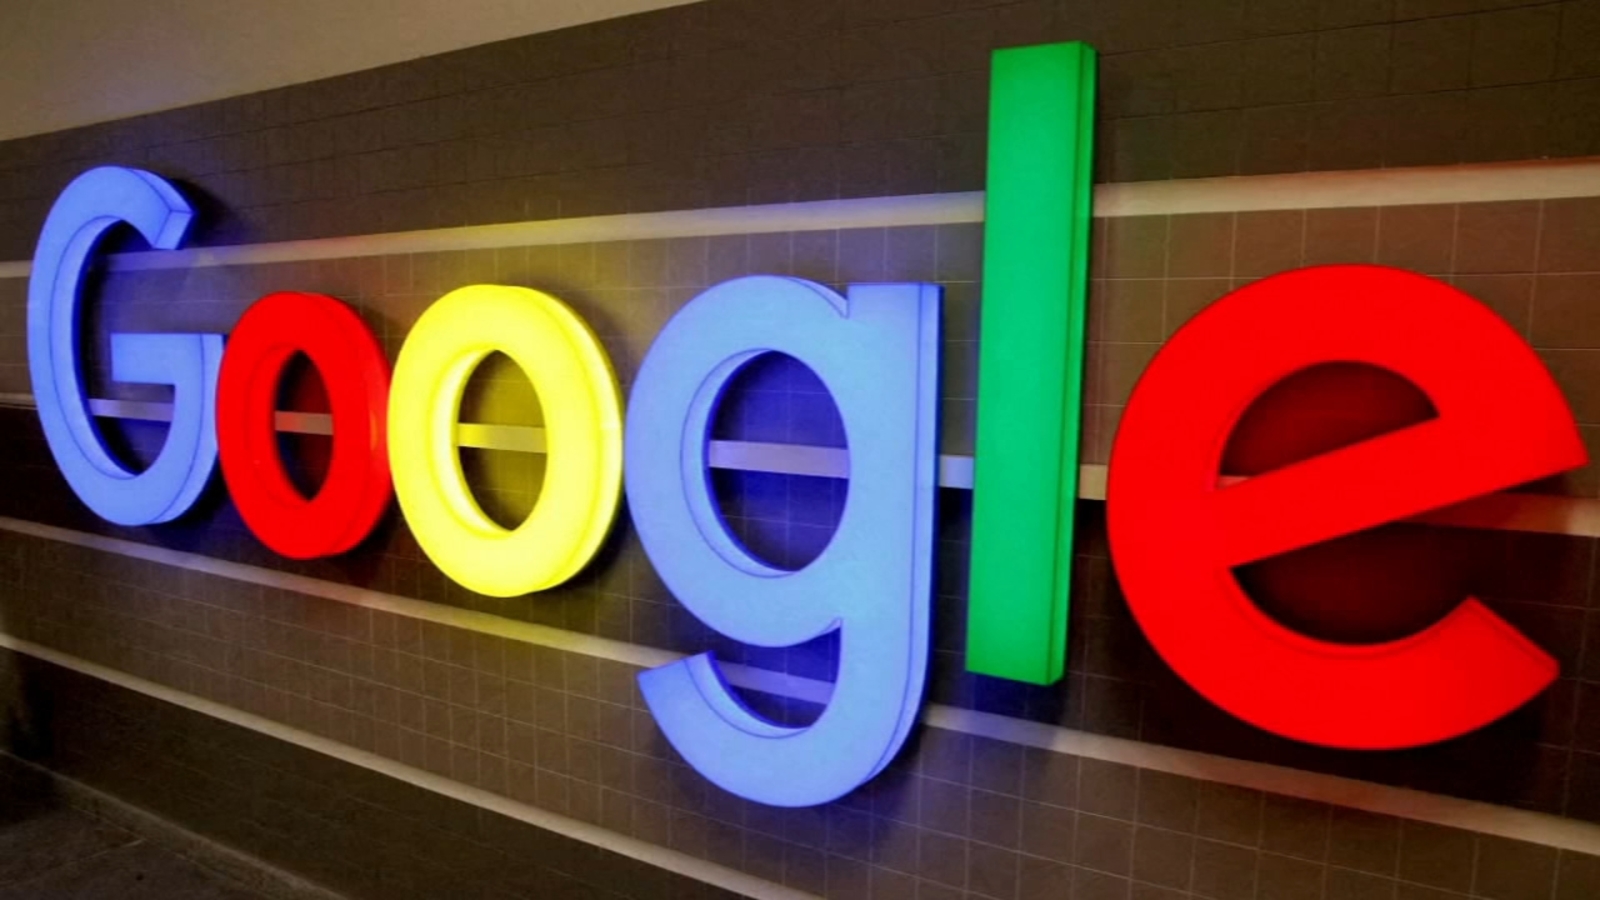 Roughly 102M US consumers will be eligible to share $630M from Google Play settlement